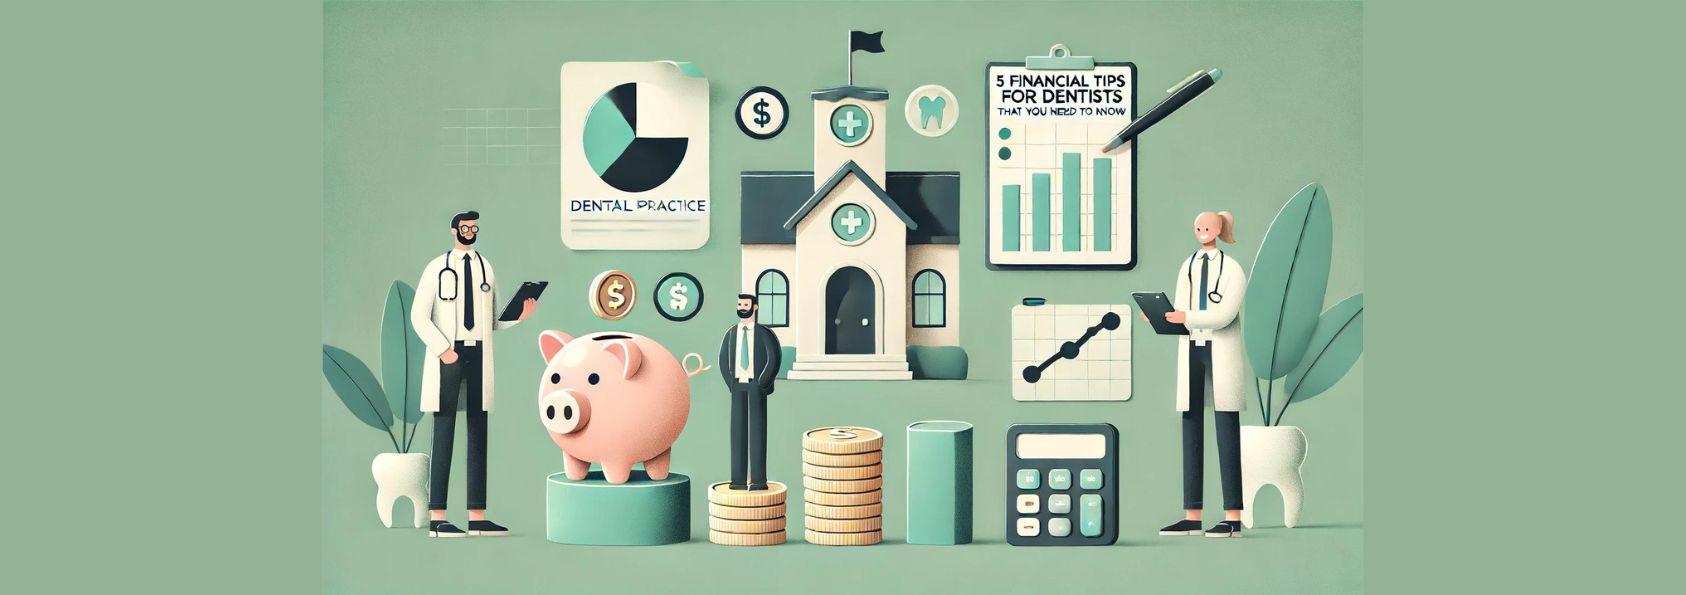 5 Financial Tips for Dentists that you Need to Know!